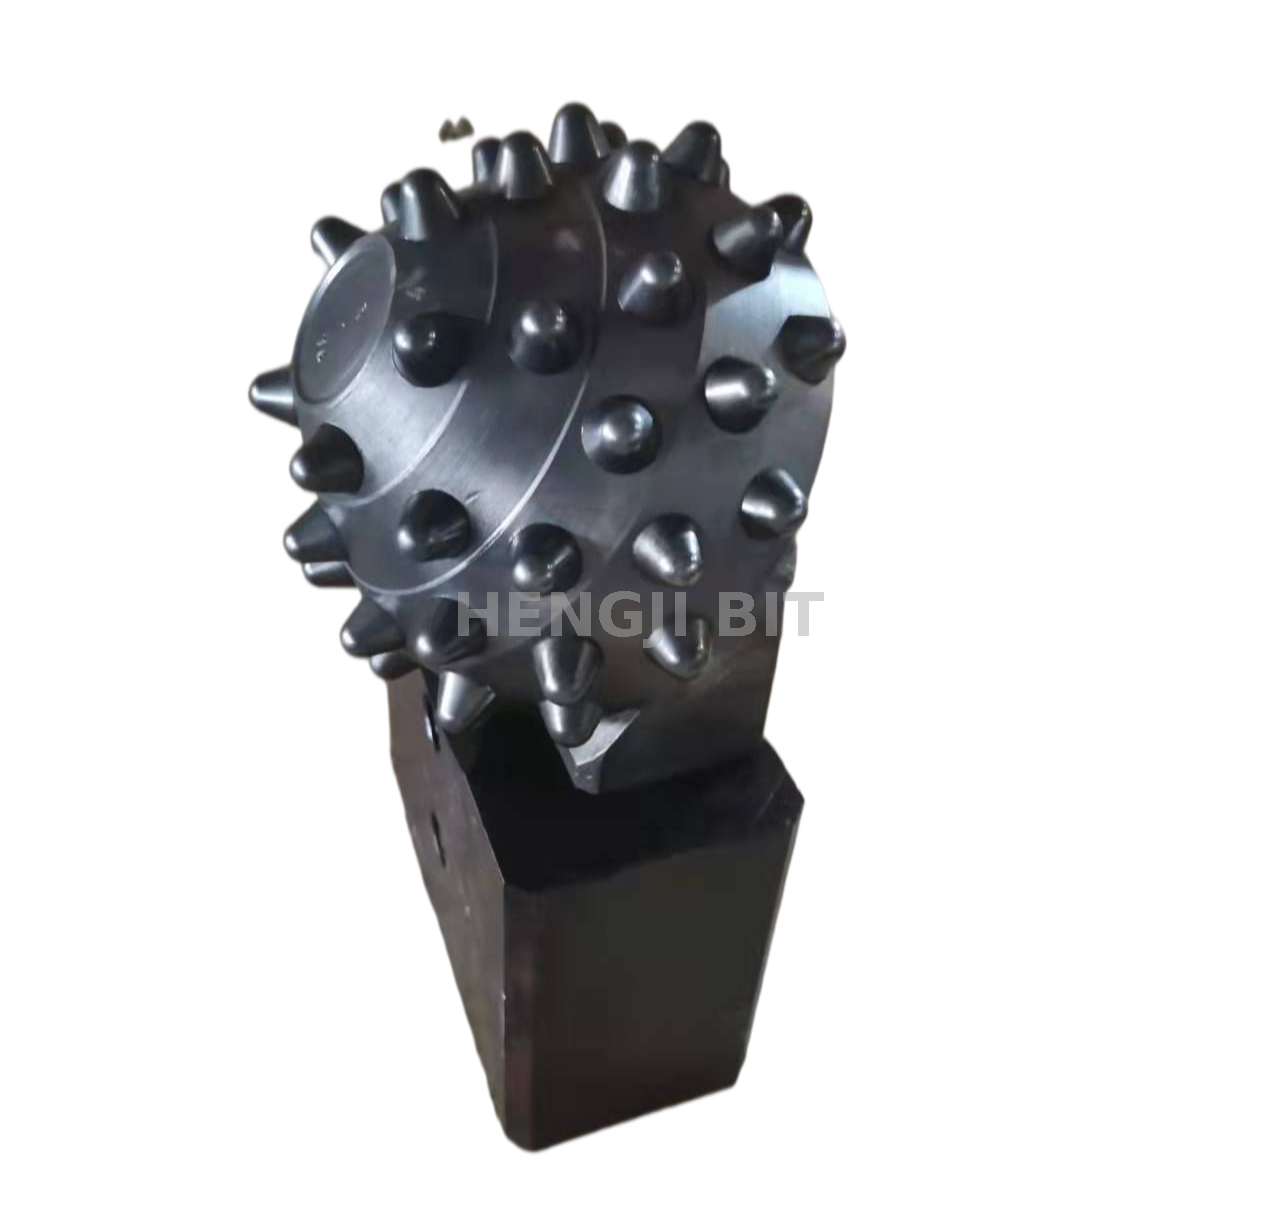 8 1/2" 215.9mm Replaceable Single Roller Bit with Holders